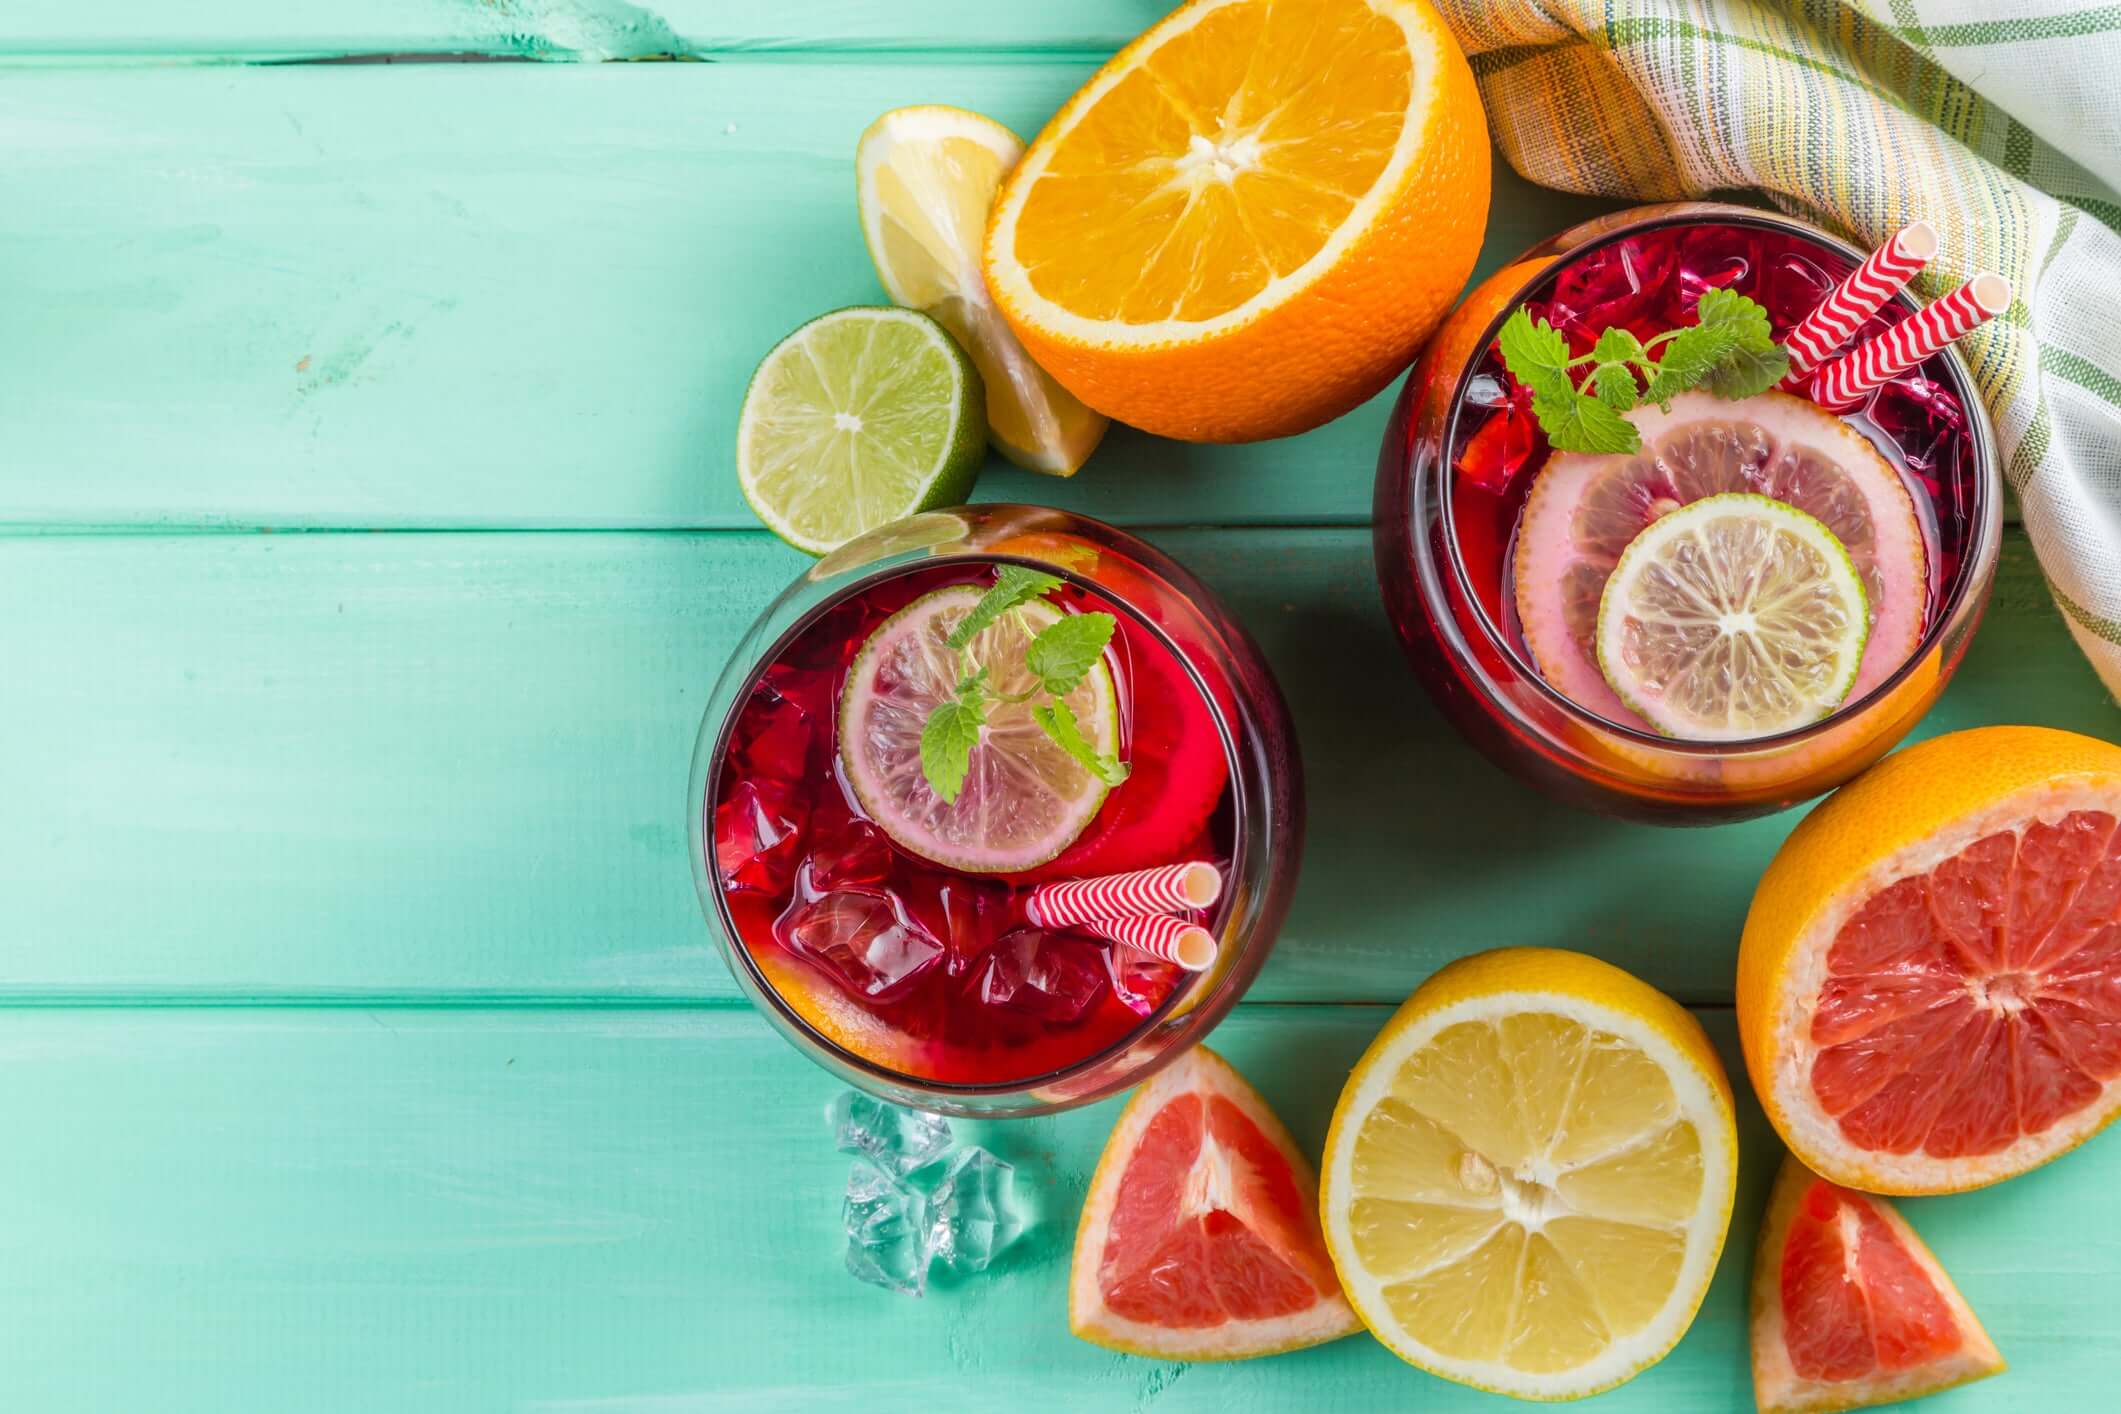 How to make Sangria for the Summer Heat